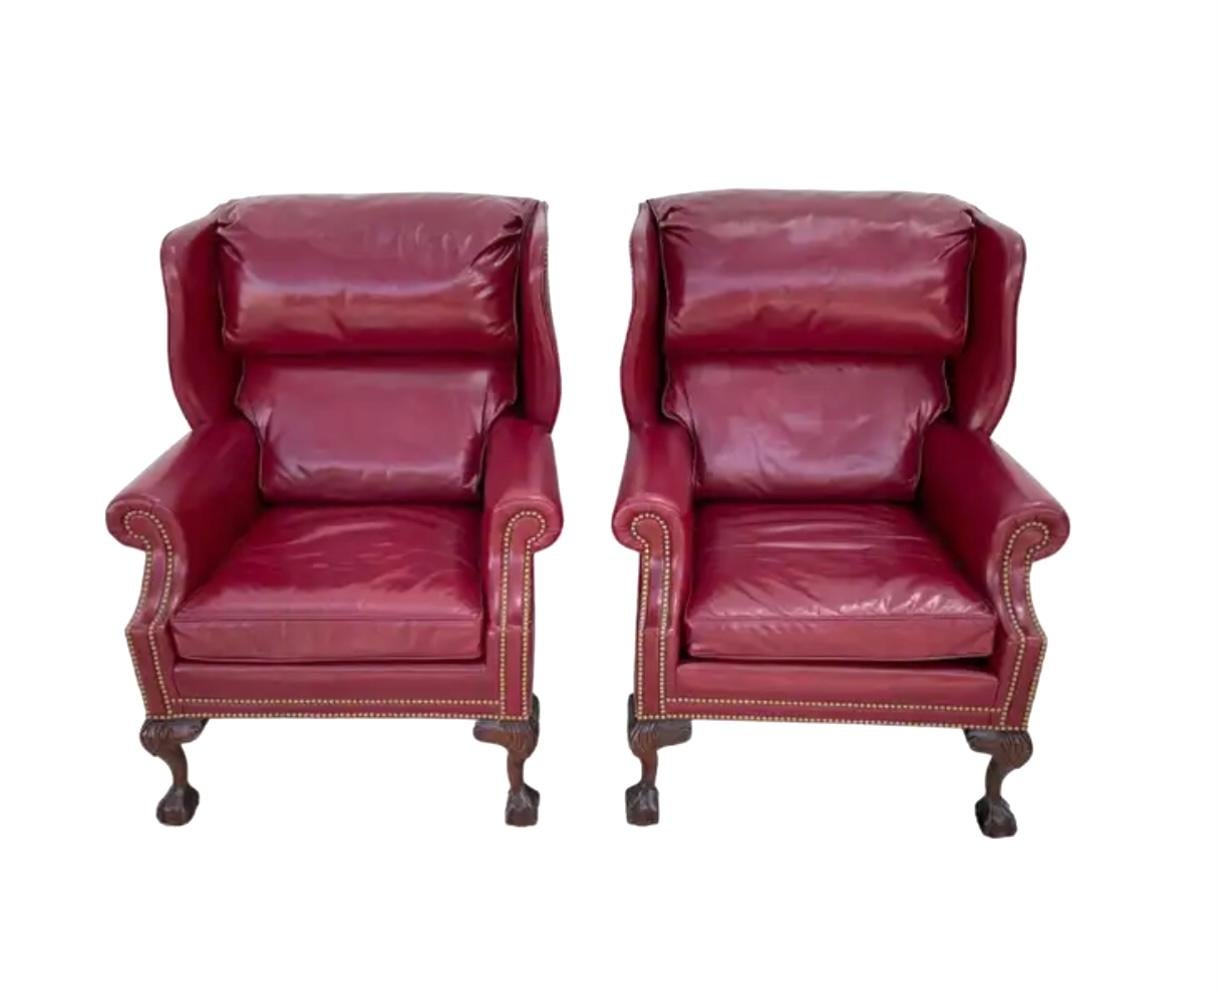 Chippendale Pair of Hancock And Moore Wingback Ball And Claw Leather Chairs